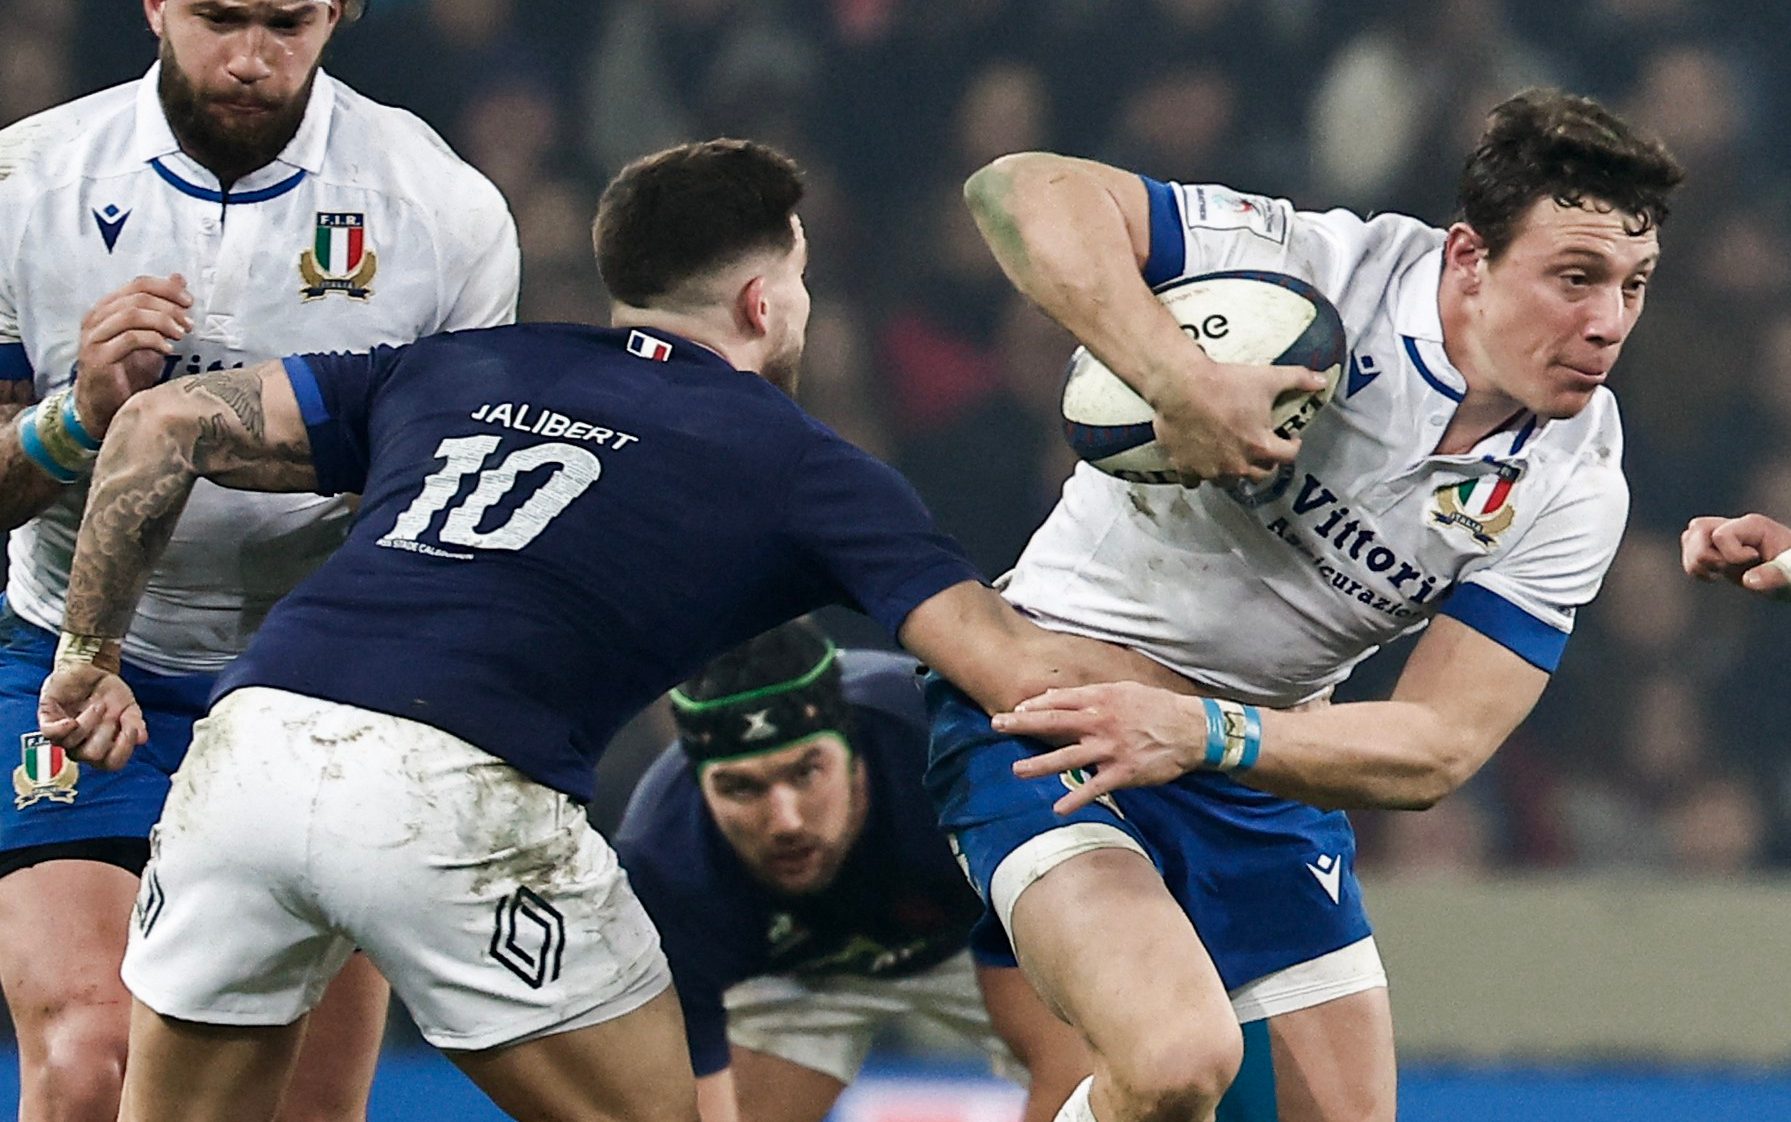 italy say missed conversion to beat france ‘should have been taken again’ after last-gasp heartbreak